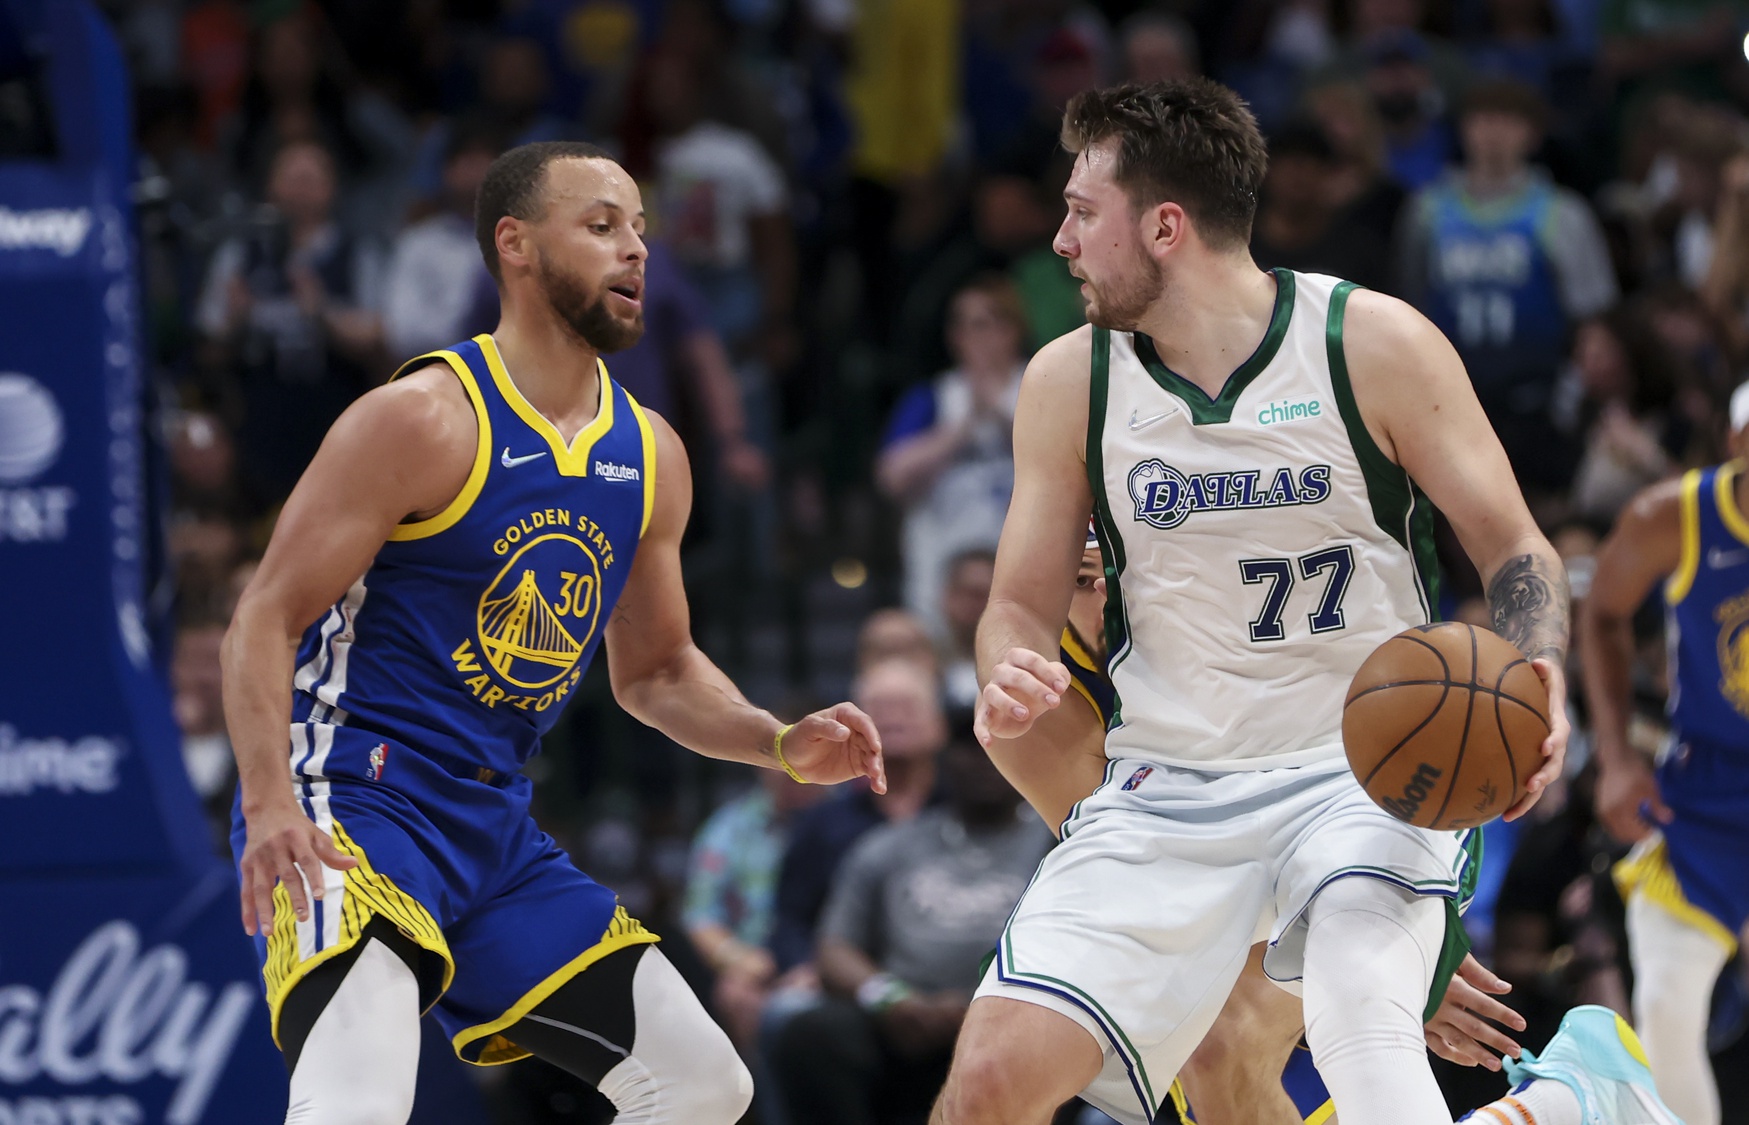 Dallas Mavericks guard Luka Doncic (77) dribbles as Golden State Warriors guard Stephen Curry (30) defends during the game at American Airlines Center.